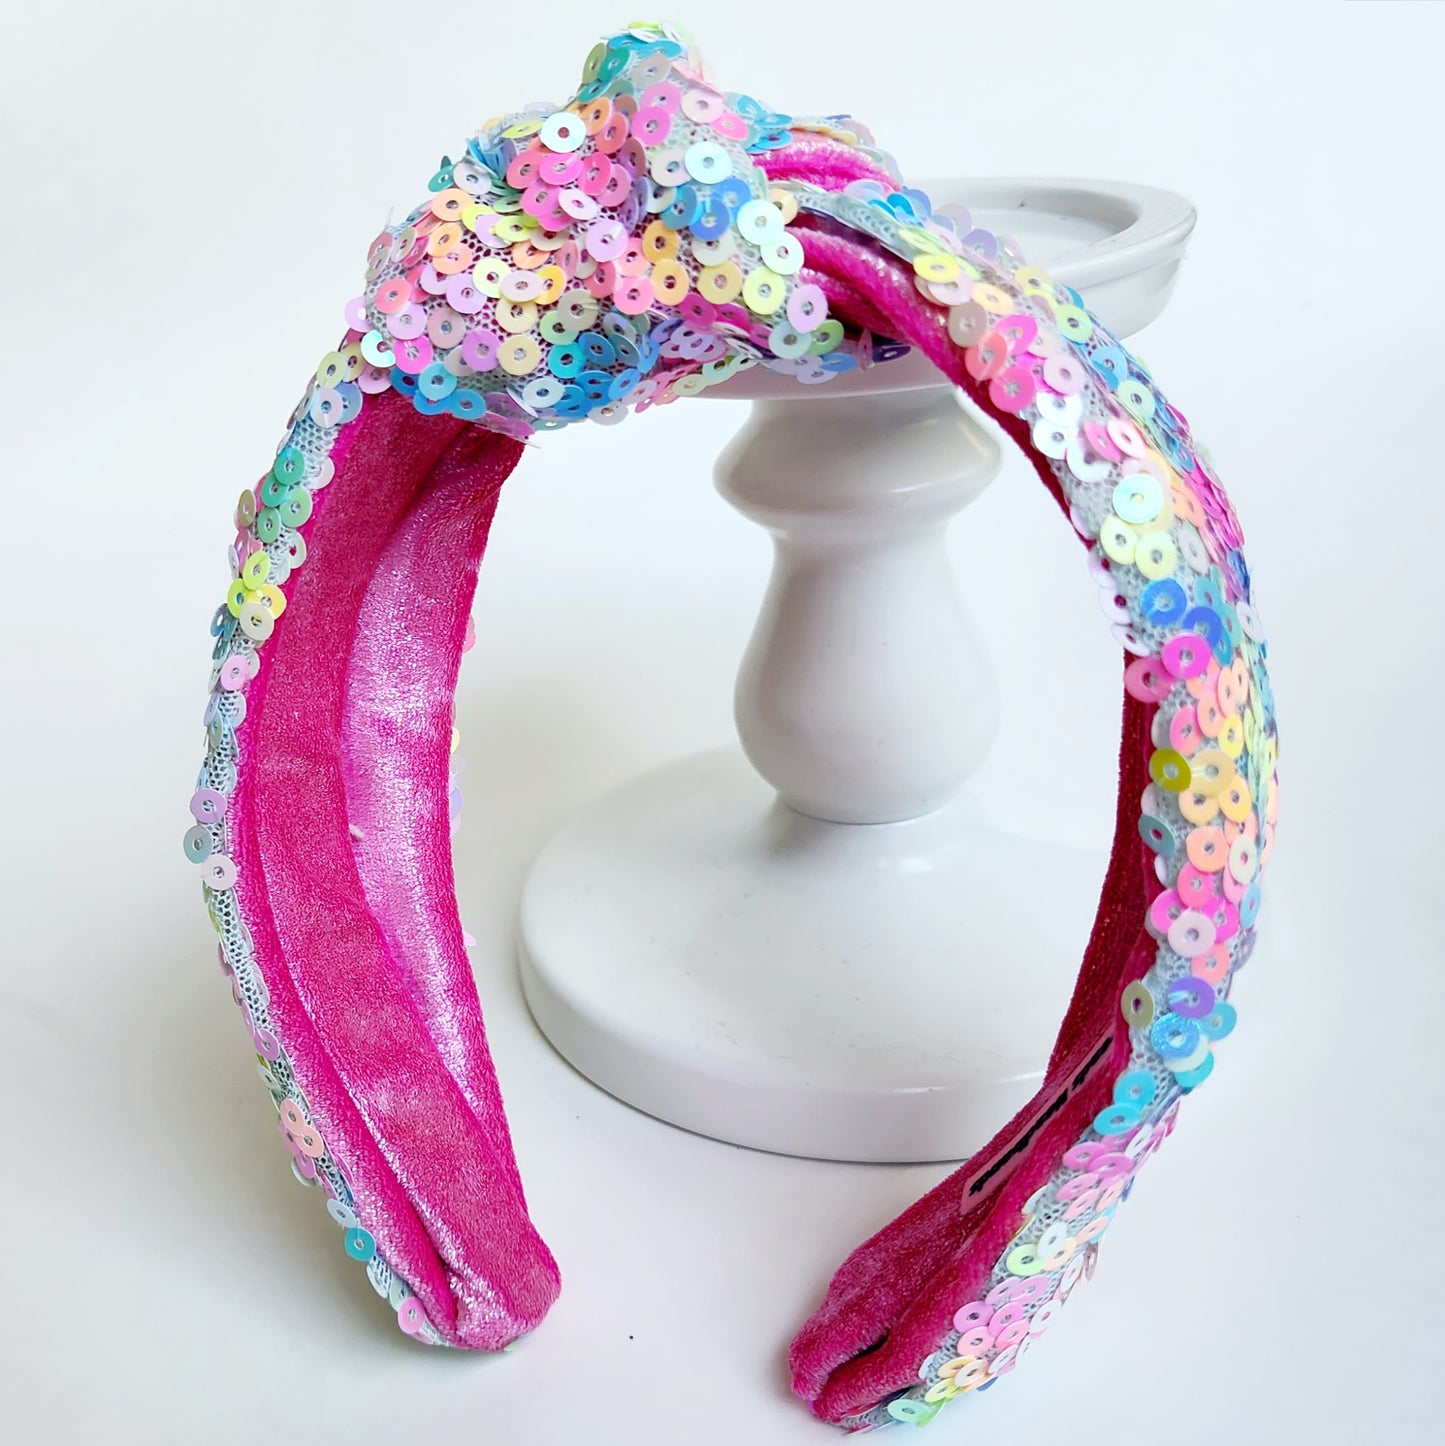 Knotted Classic Headband Pink and Sequin